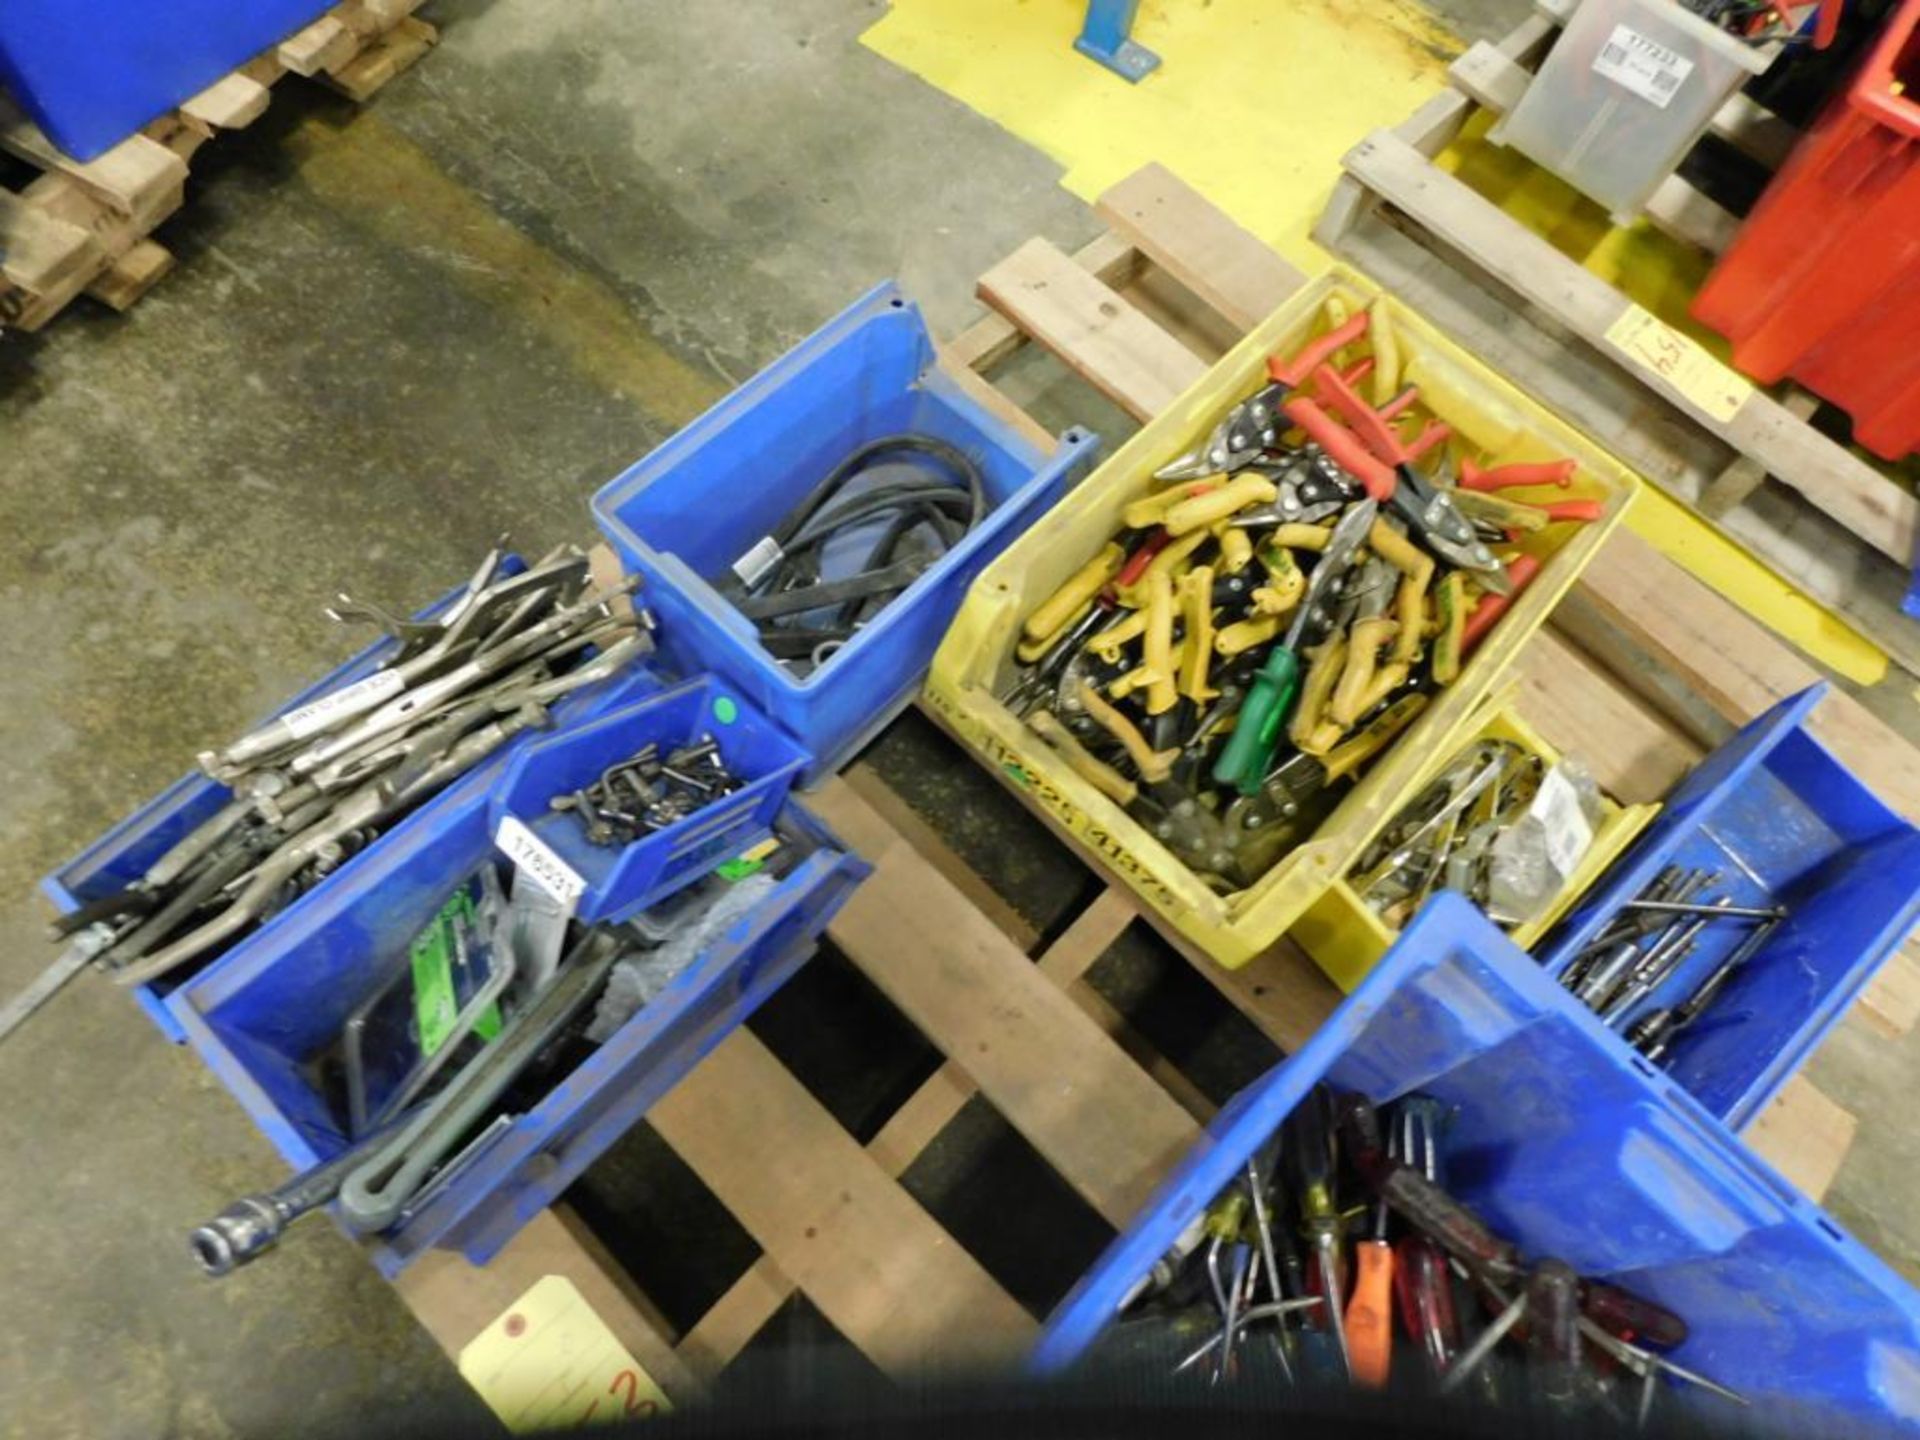 LOT CONSISTING OF: vise grips, screw drivers, tin snips (on one pallet) - Image 2 of 2